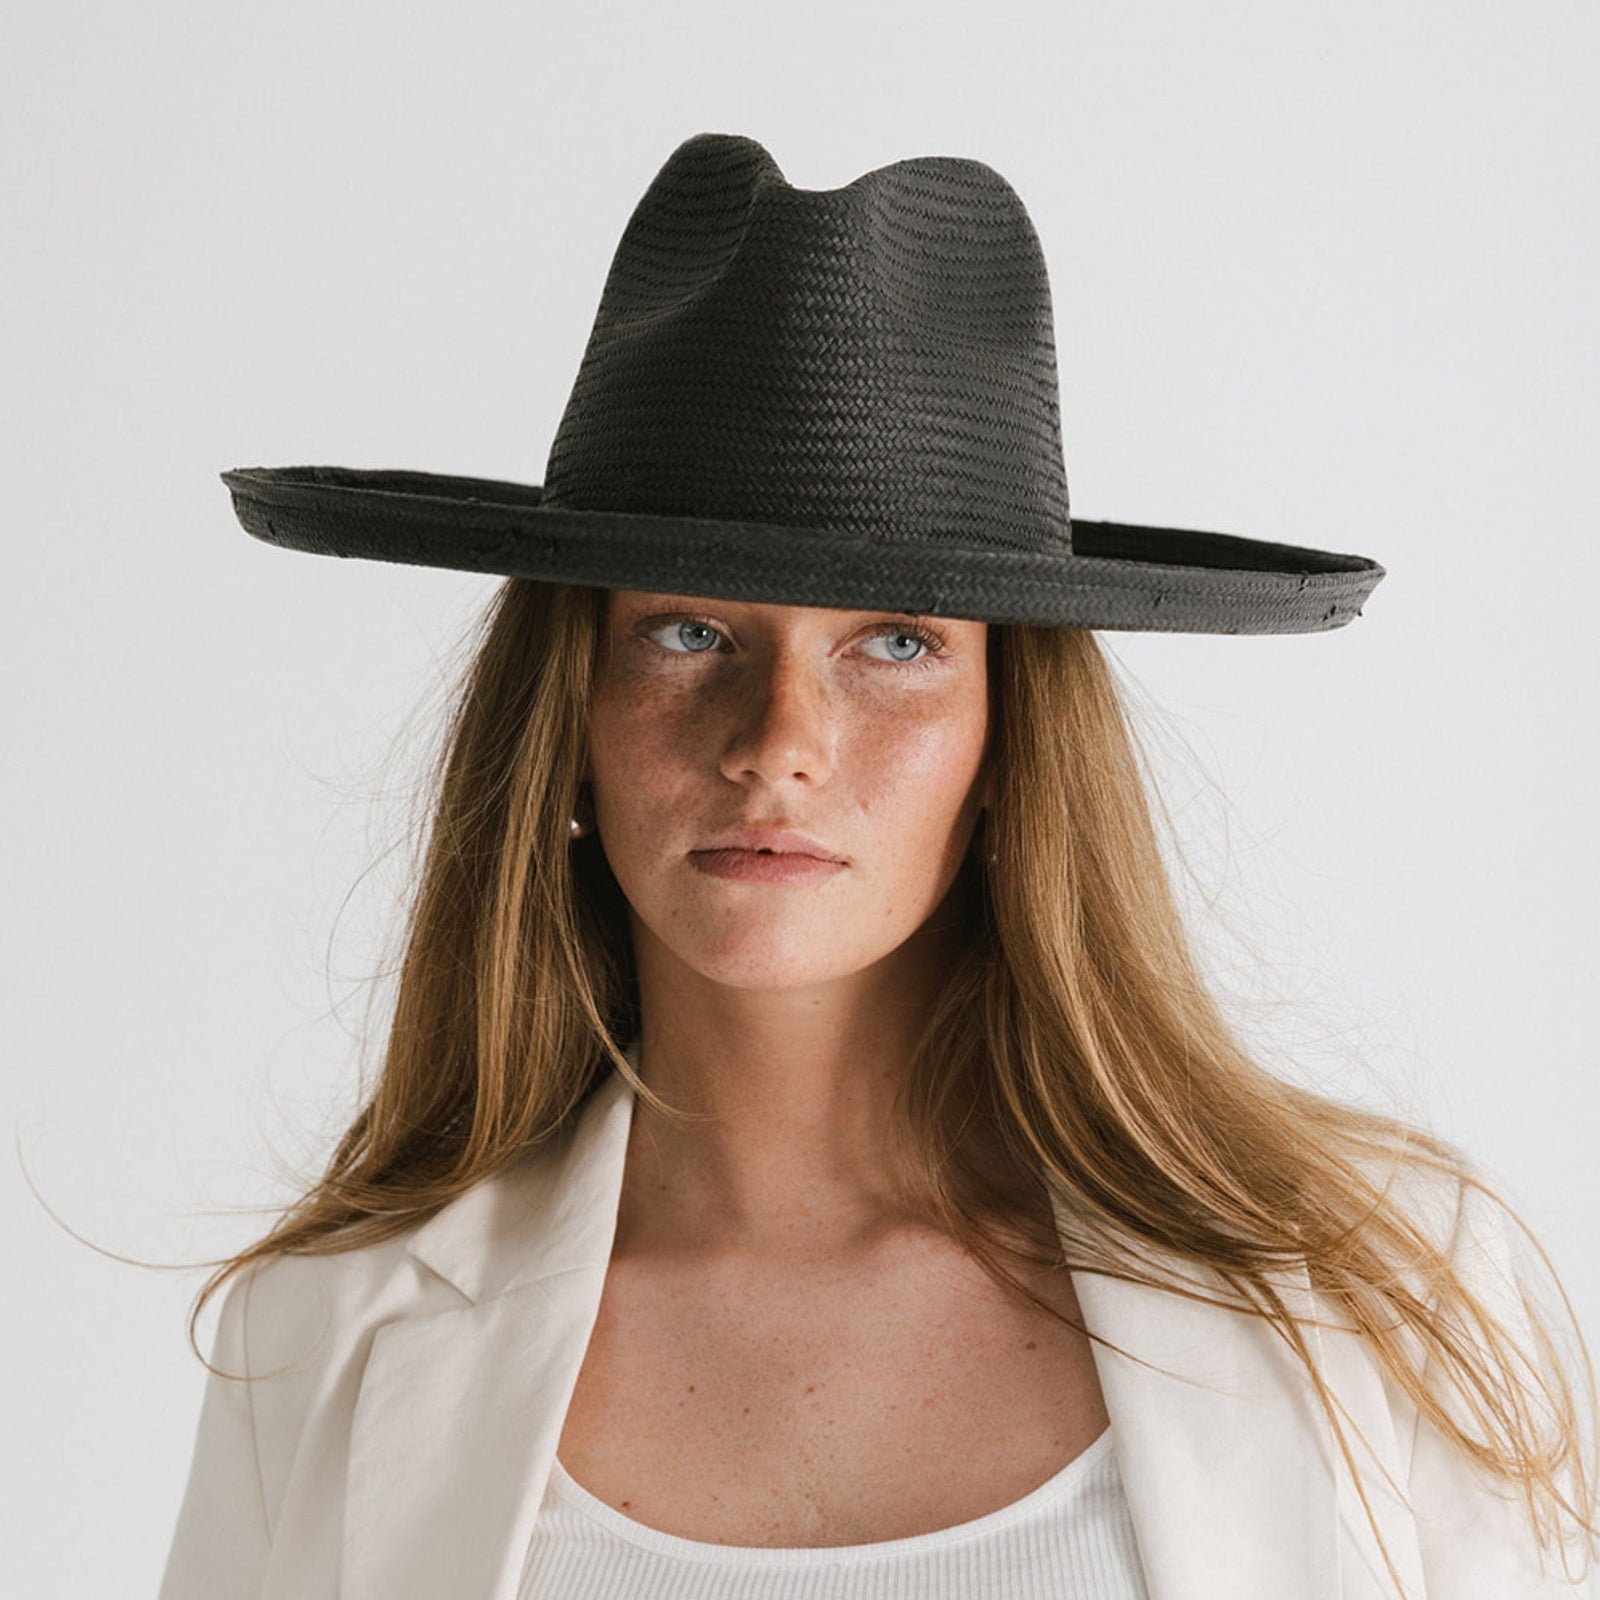 Stylish Hats for Women at GIGI PIP - Elevate Your Look Today!